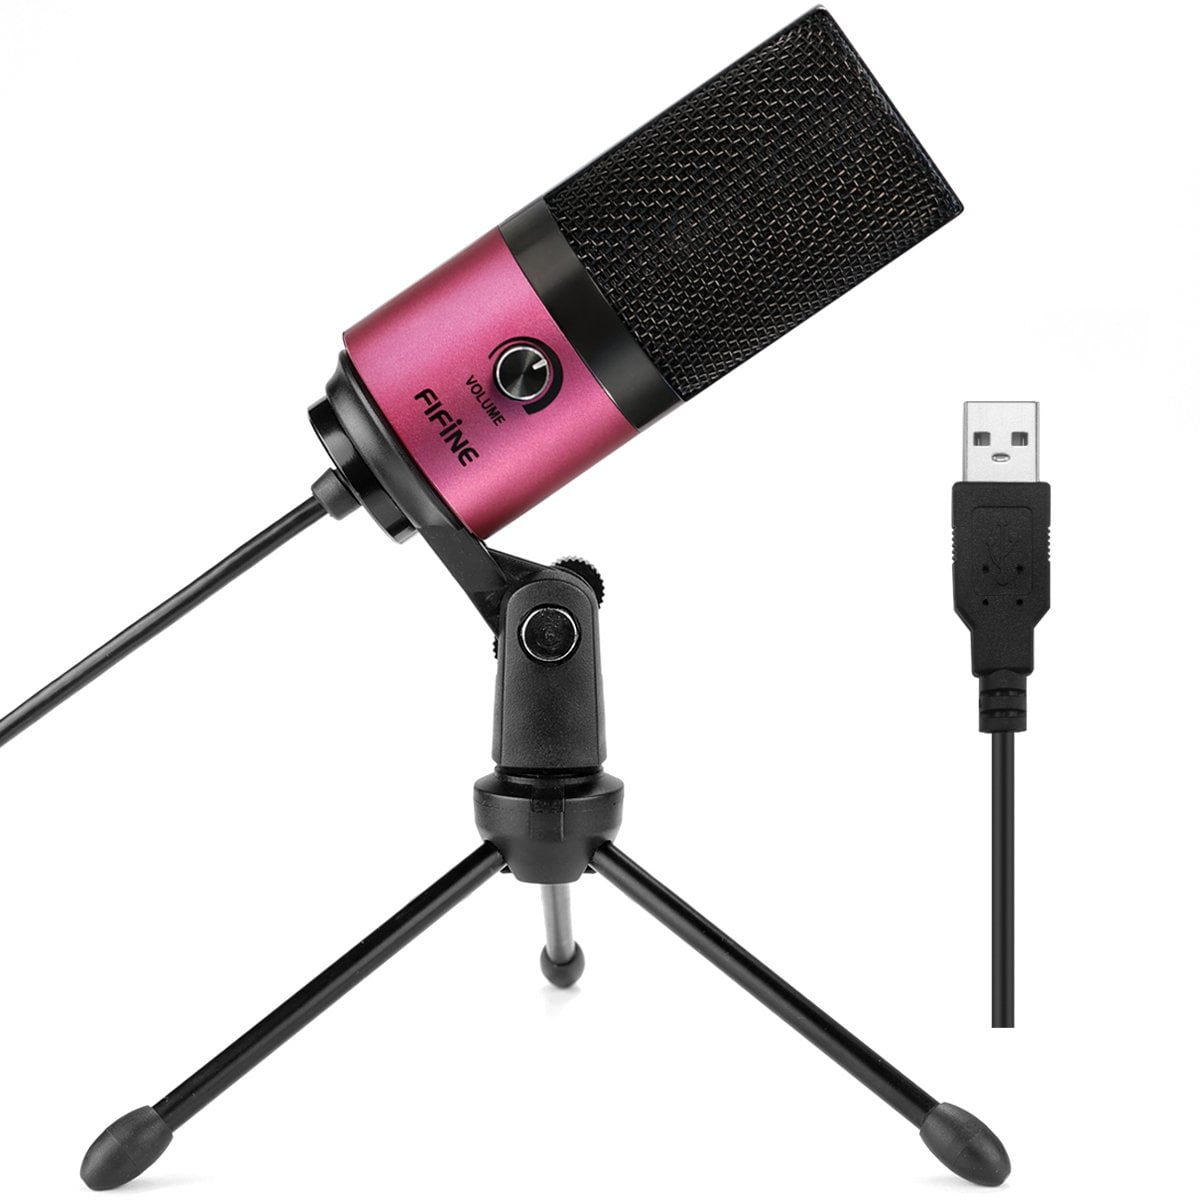 FIFINE USB Podcast Condenser Microphone Recording On Laptop, No